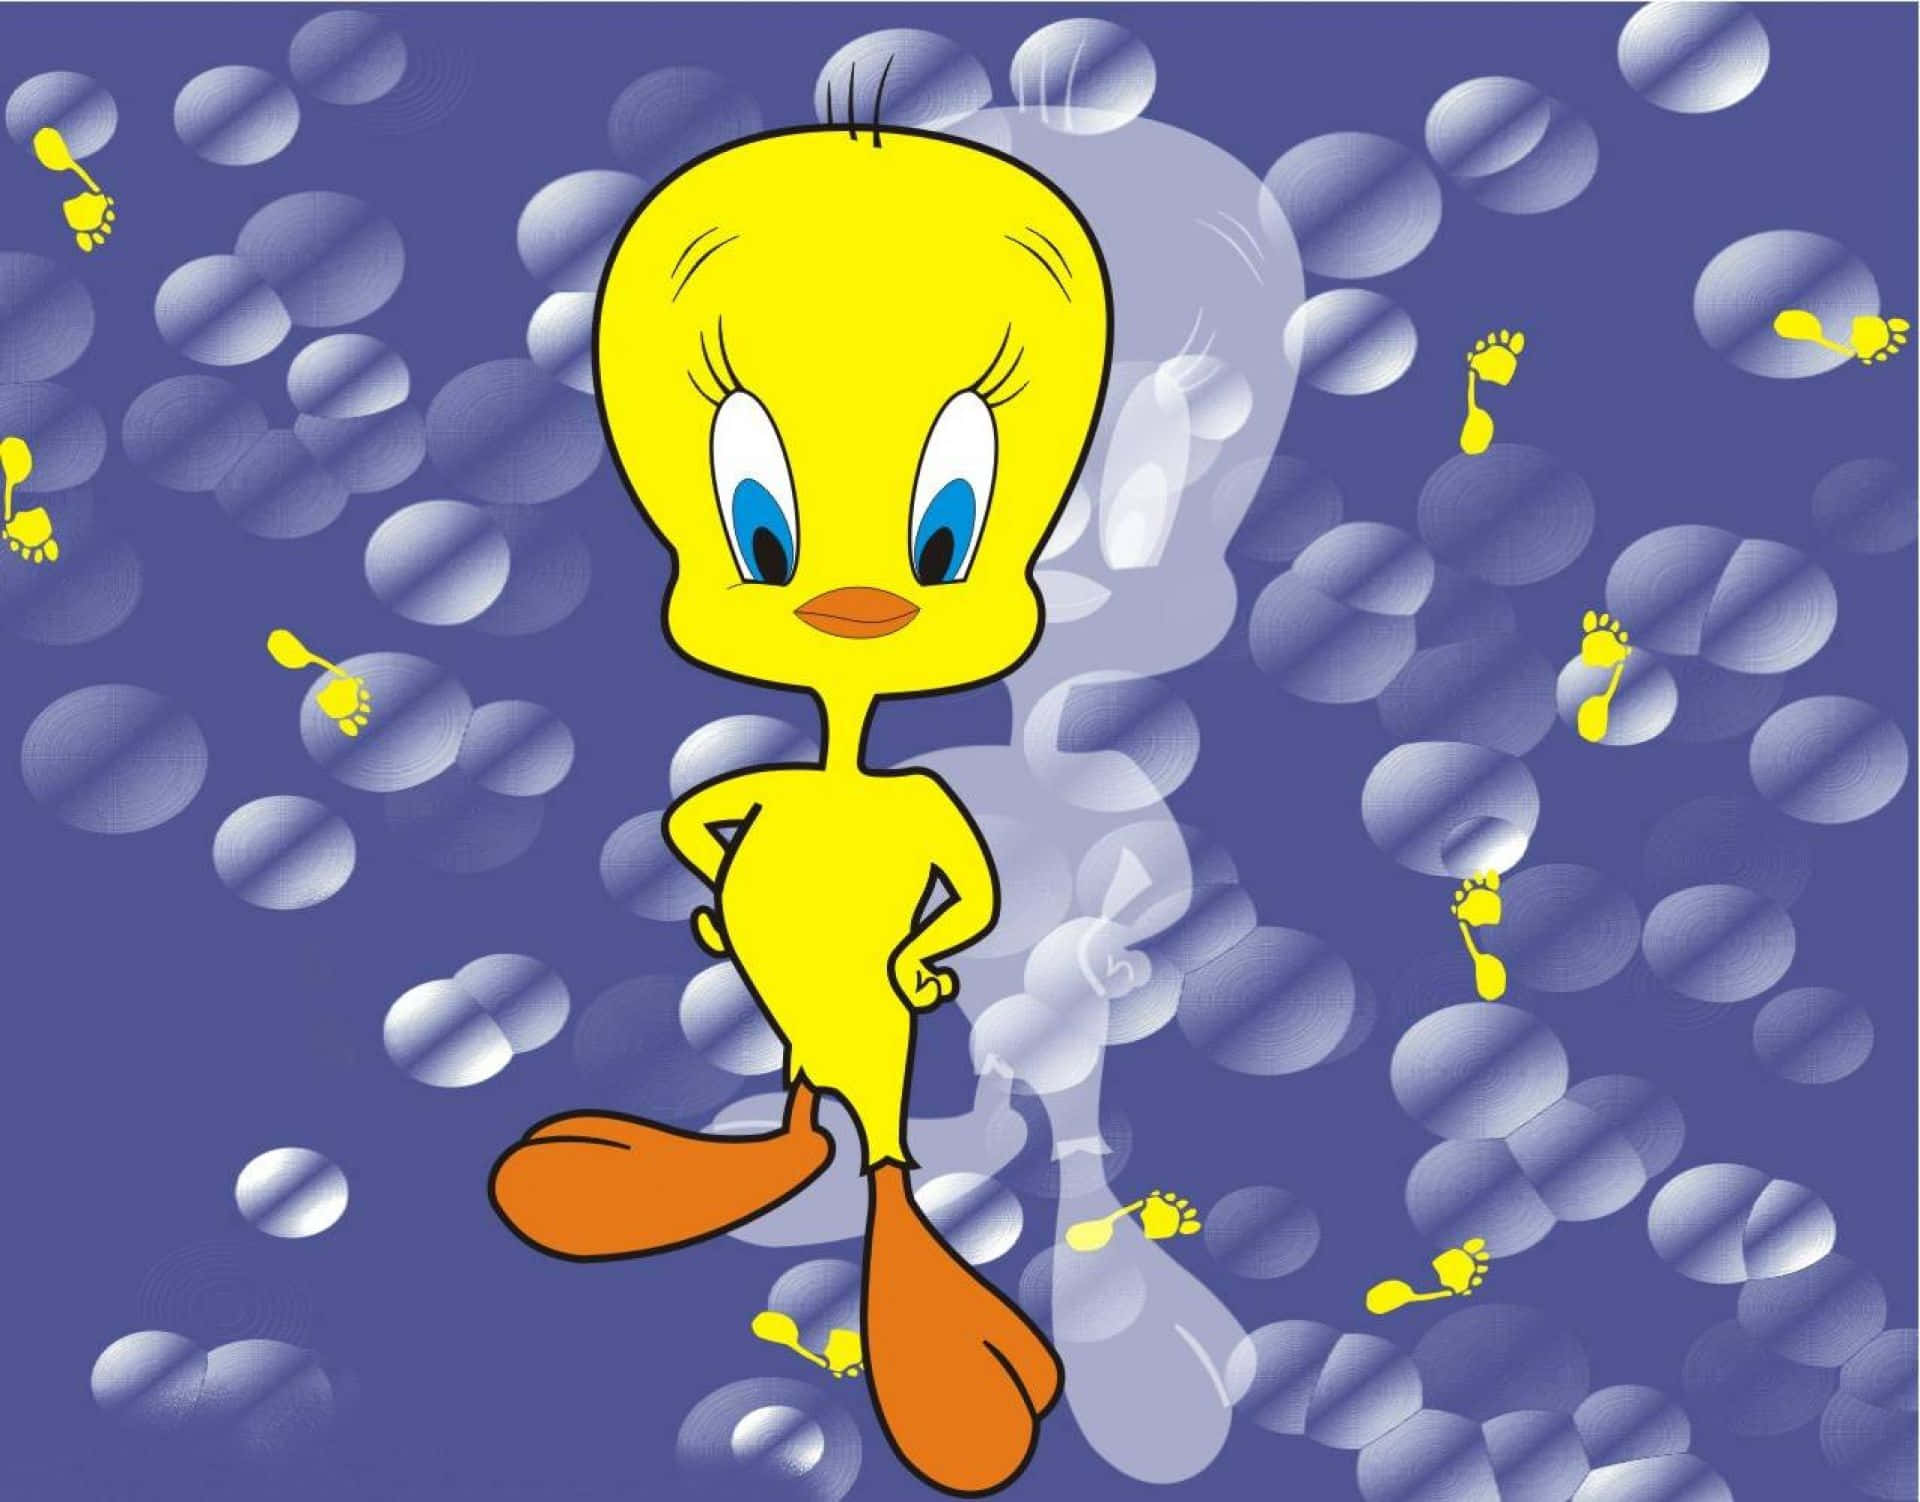 "You get nothing without the right attitude!" - Tweety Bird